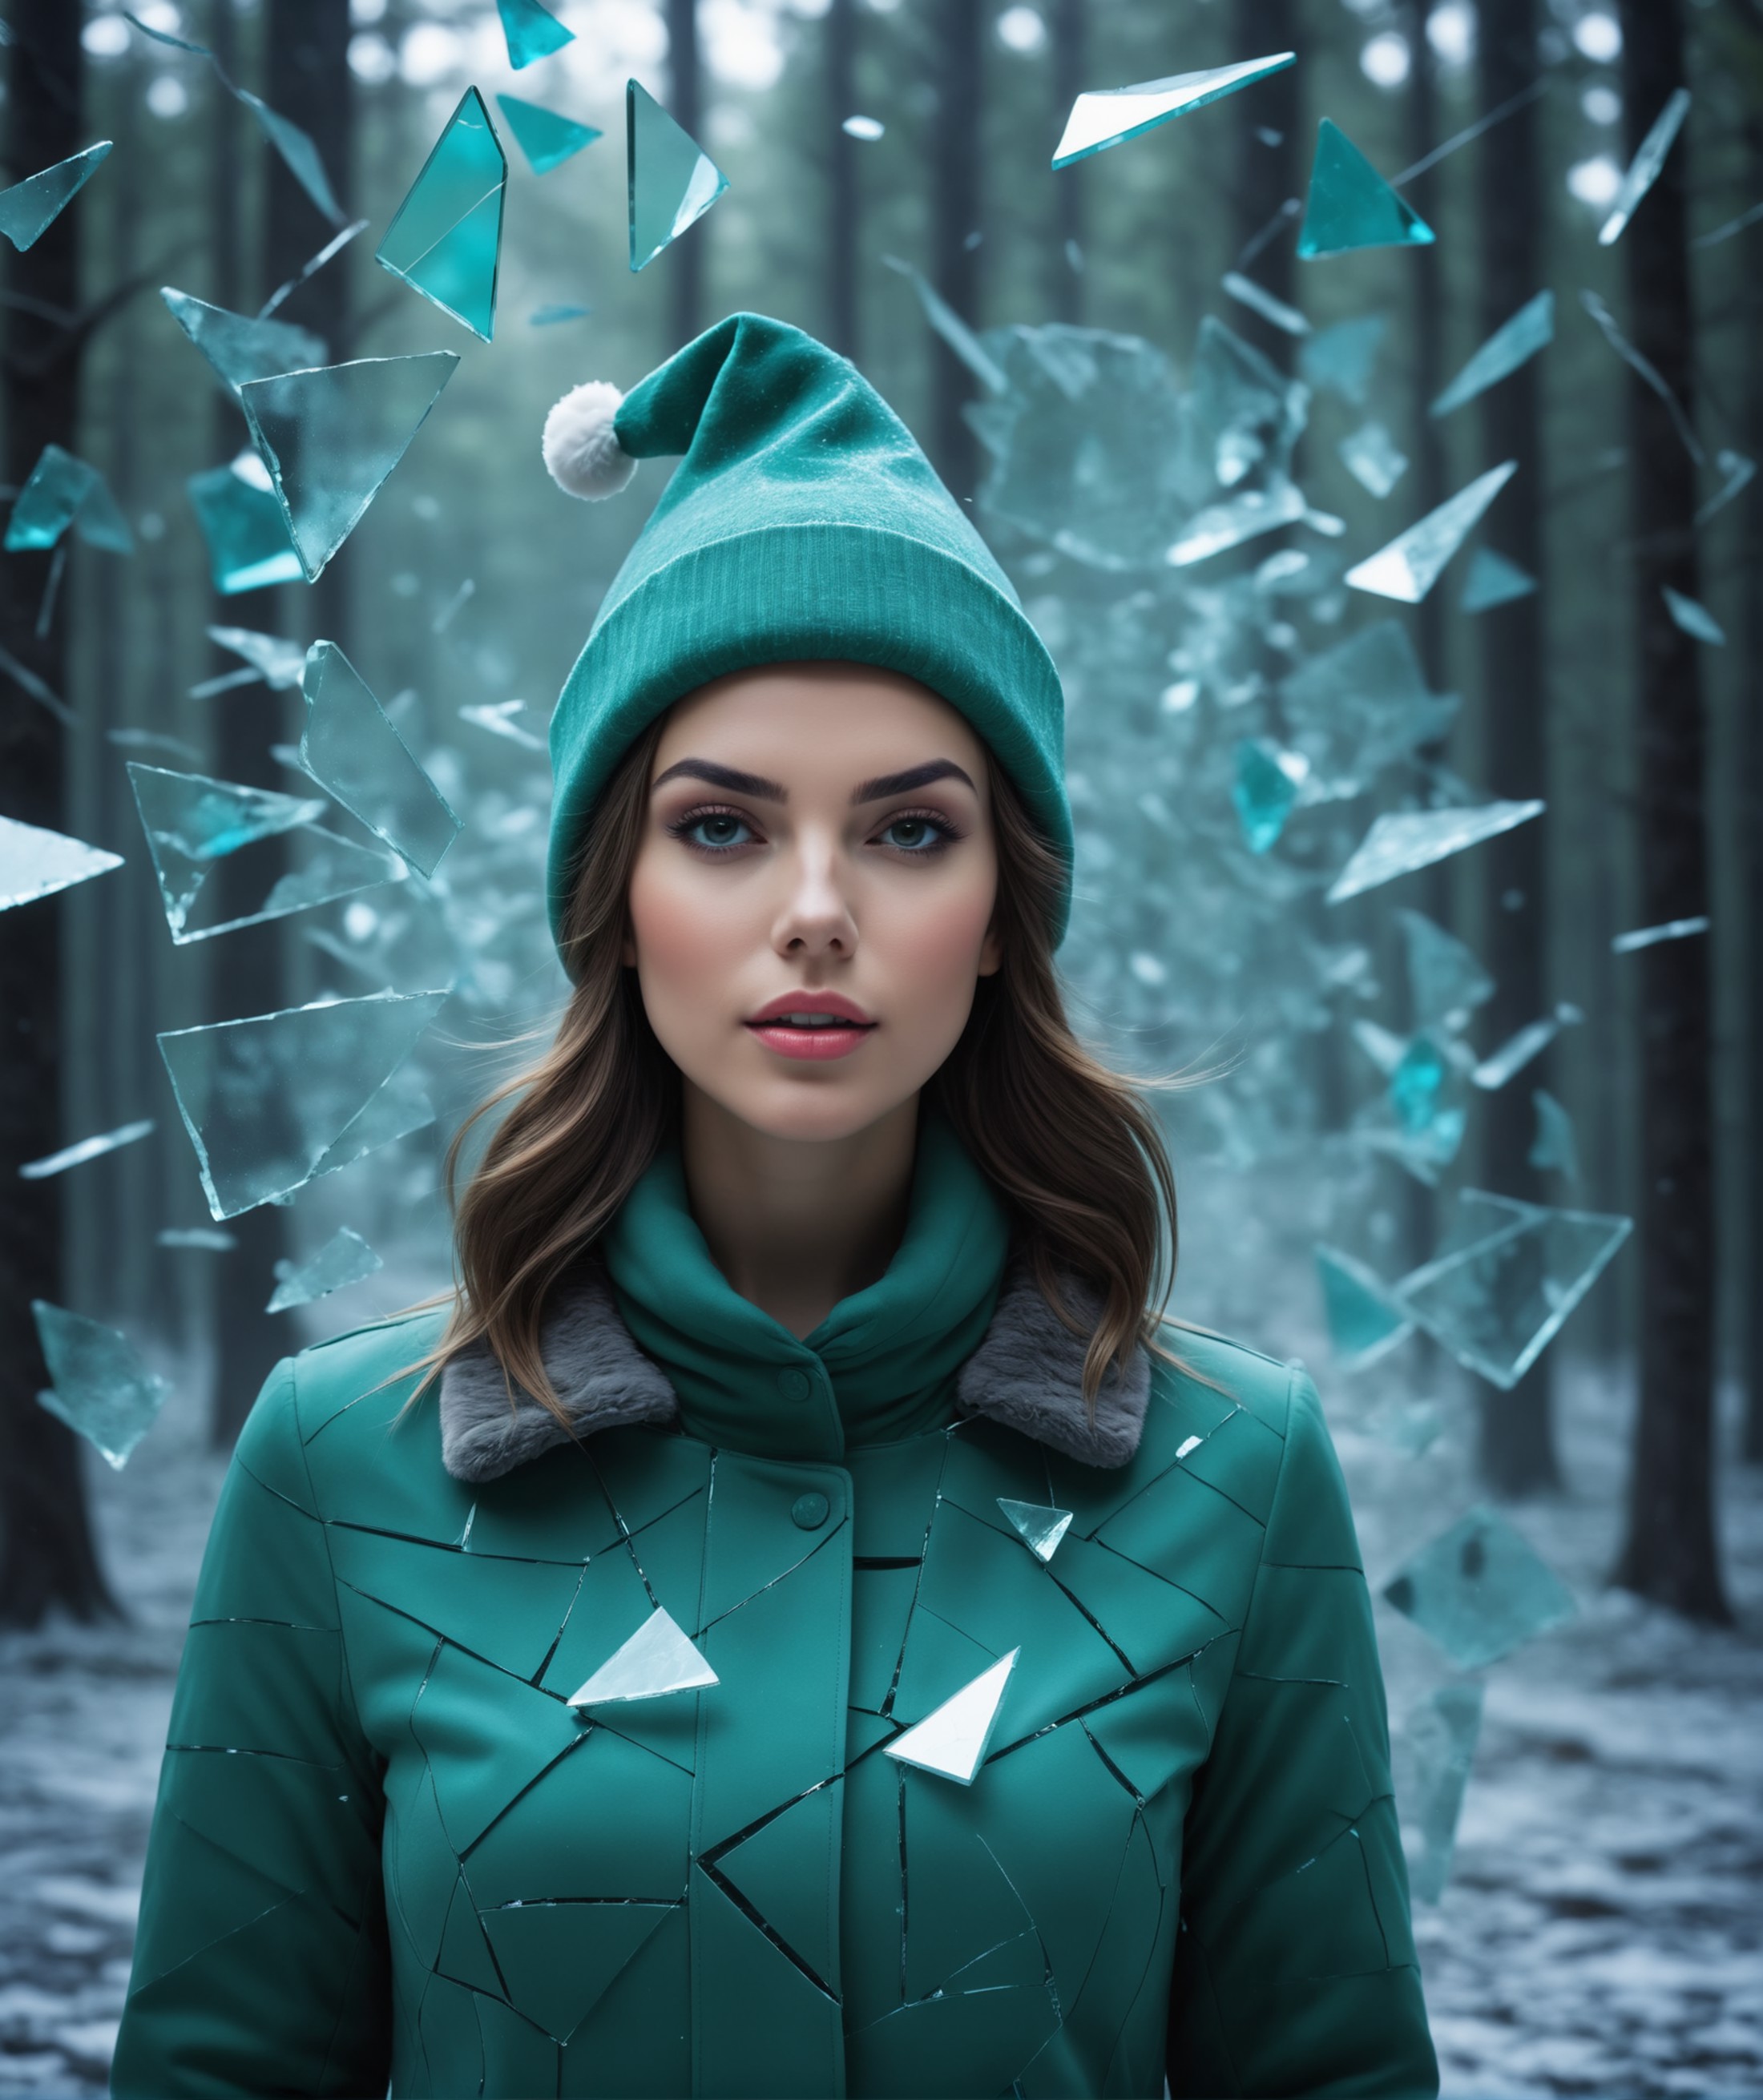 long exposure shot, of a beautiful girl in a green santa hat and warm coat crossing throw the transparent glass mirror, fo...